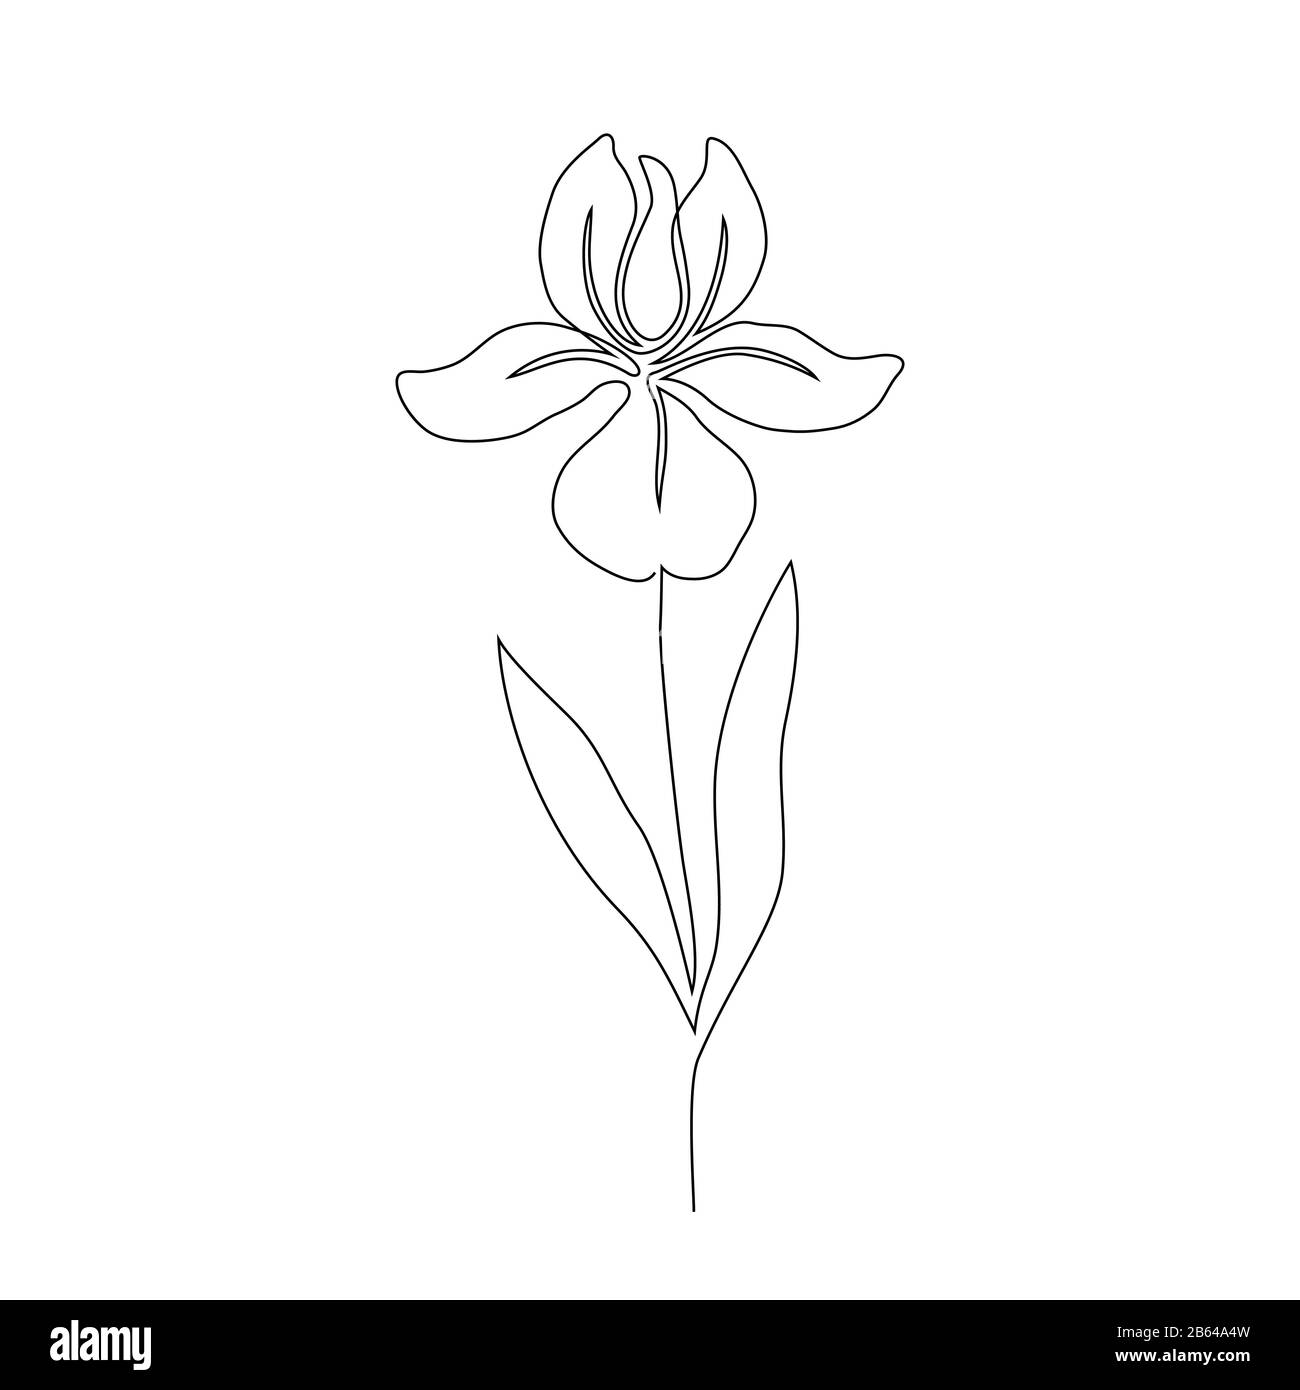 Iris flower drawing Black and White Stock Photos & Images - Alamy